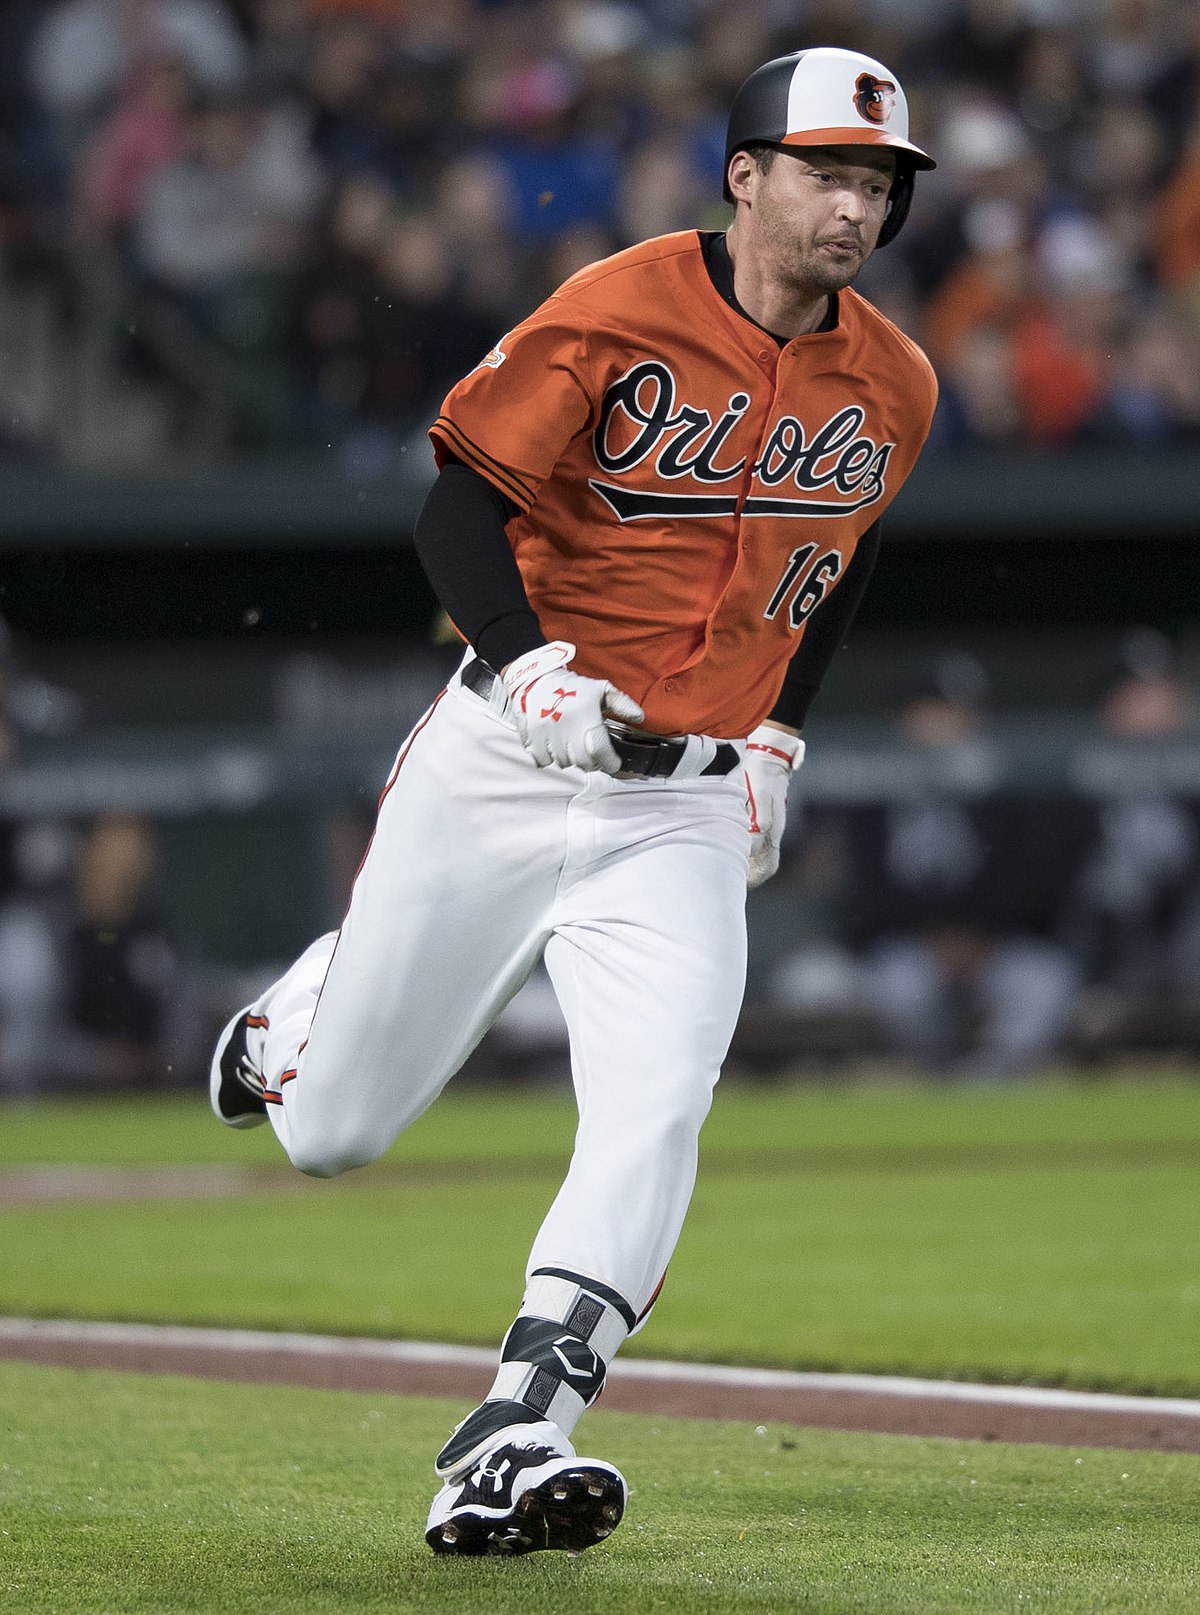 Baltimore Orioles and an analysis of Trey Mancini at the plate